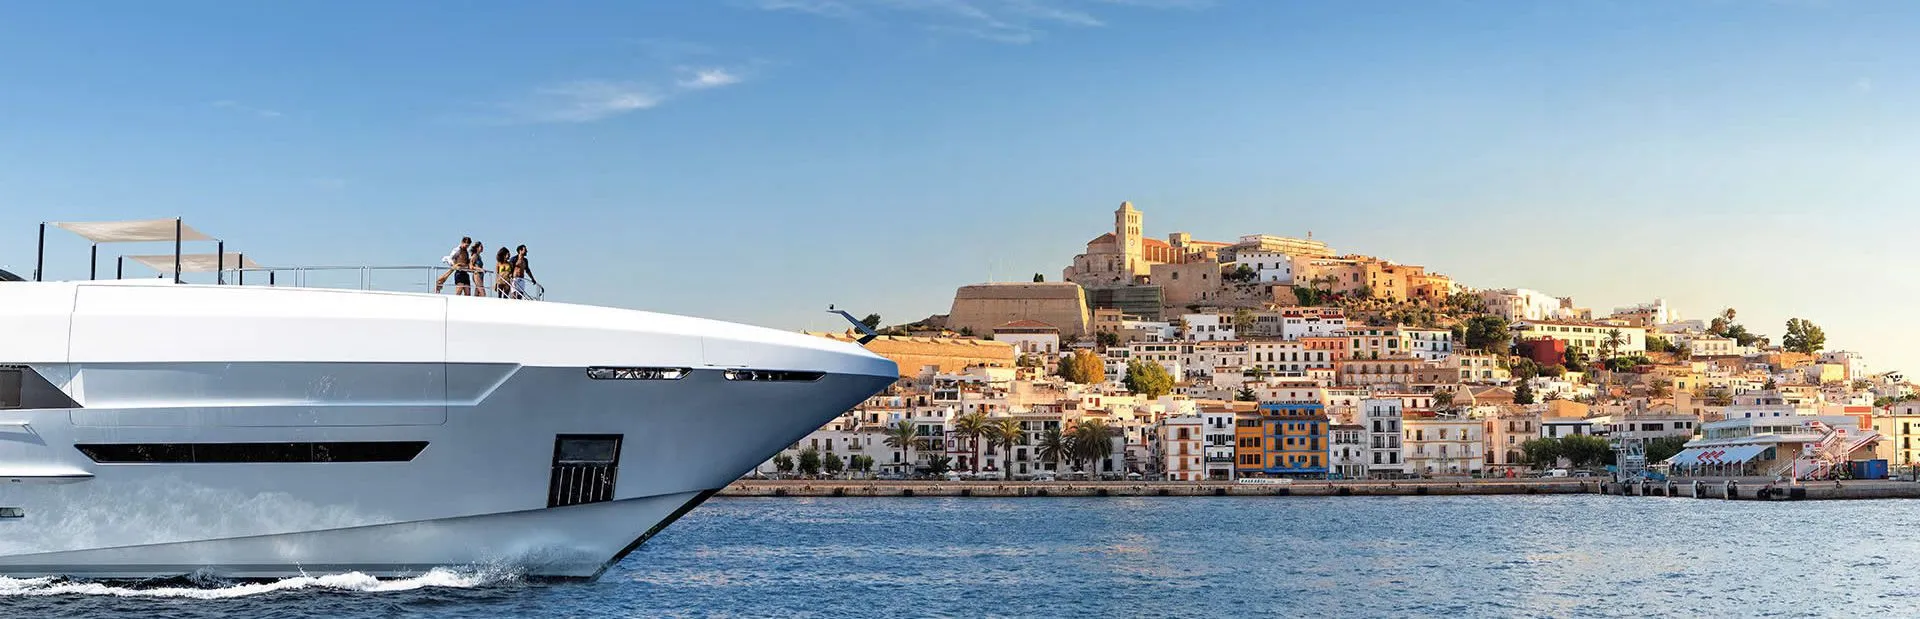 Superyacht being chartered at Ibiza